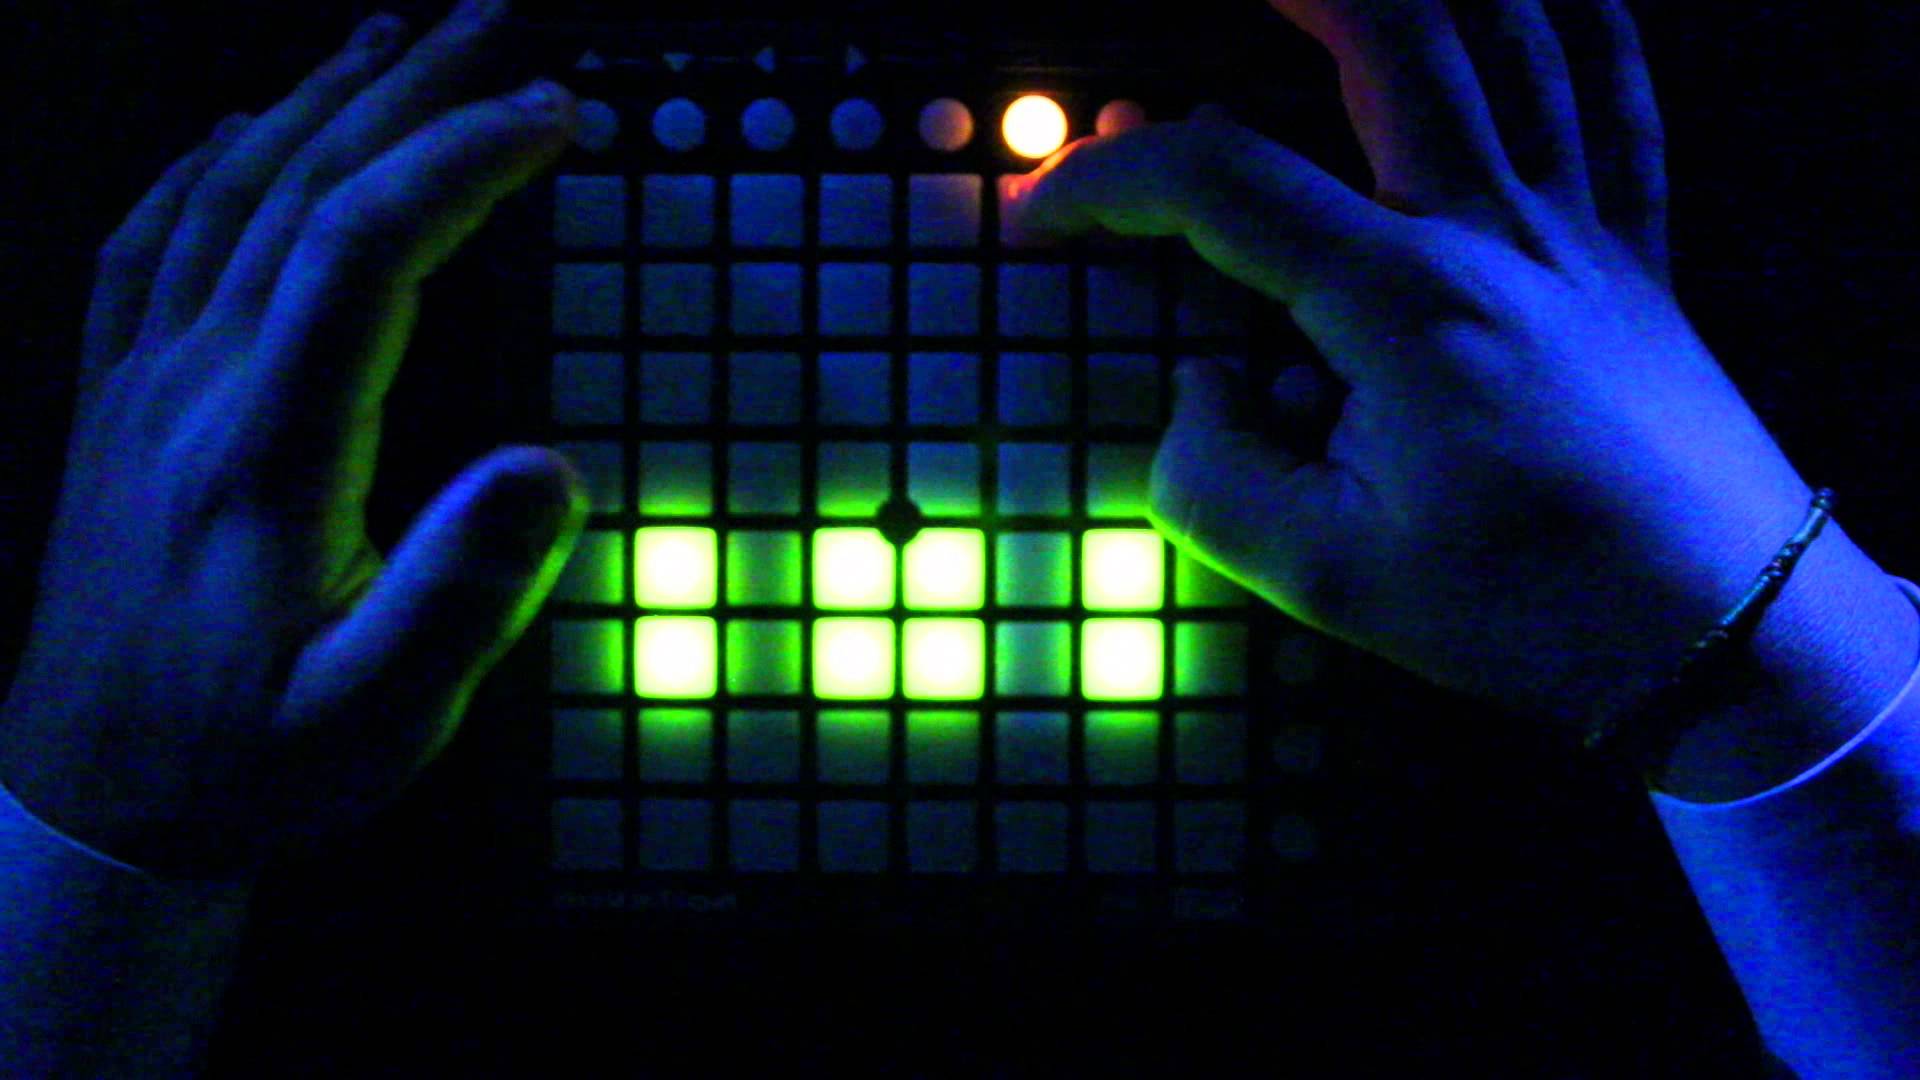 Can You Feel My Heart Me The Horizon (Launchpad Cover)